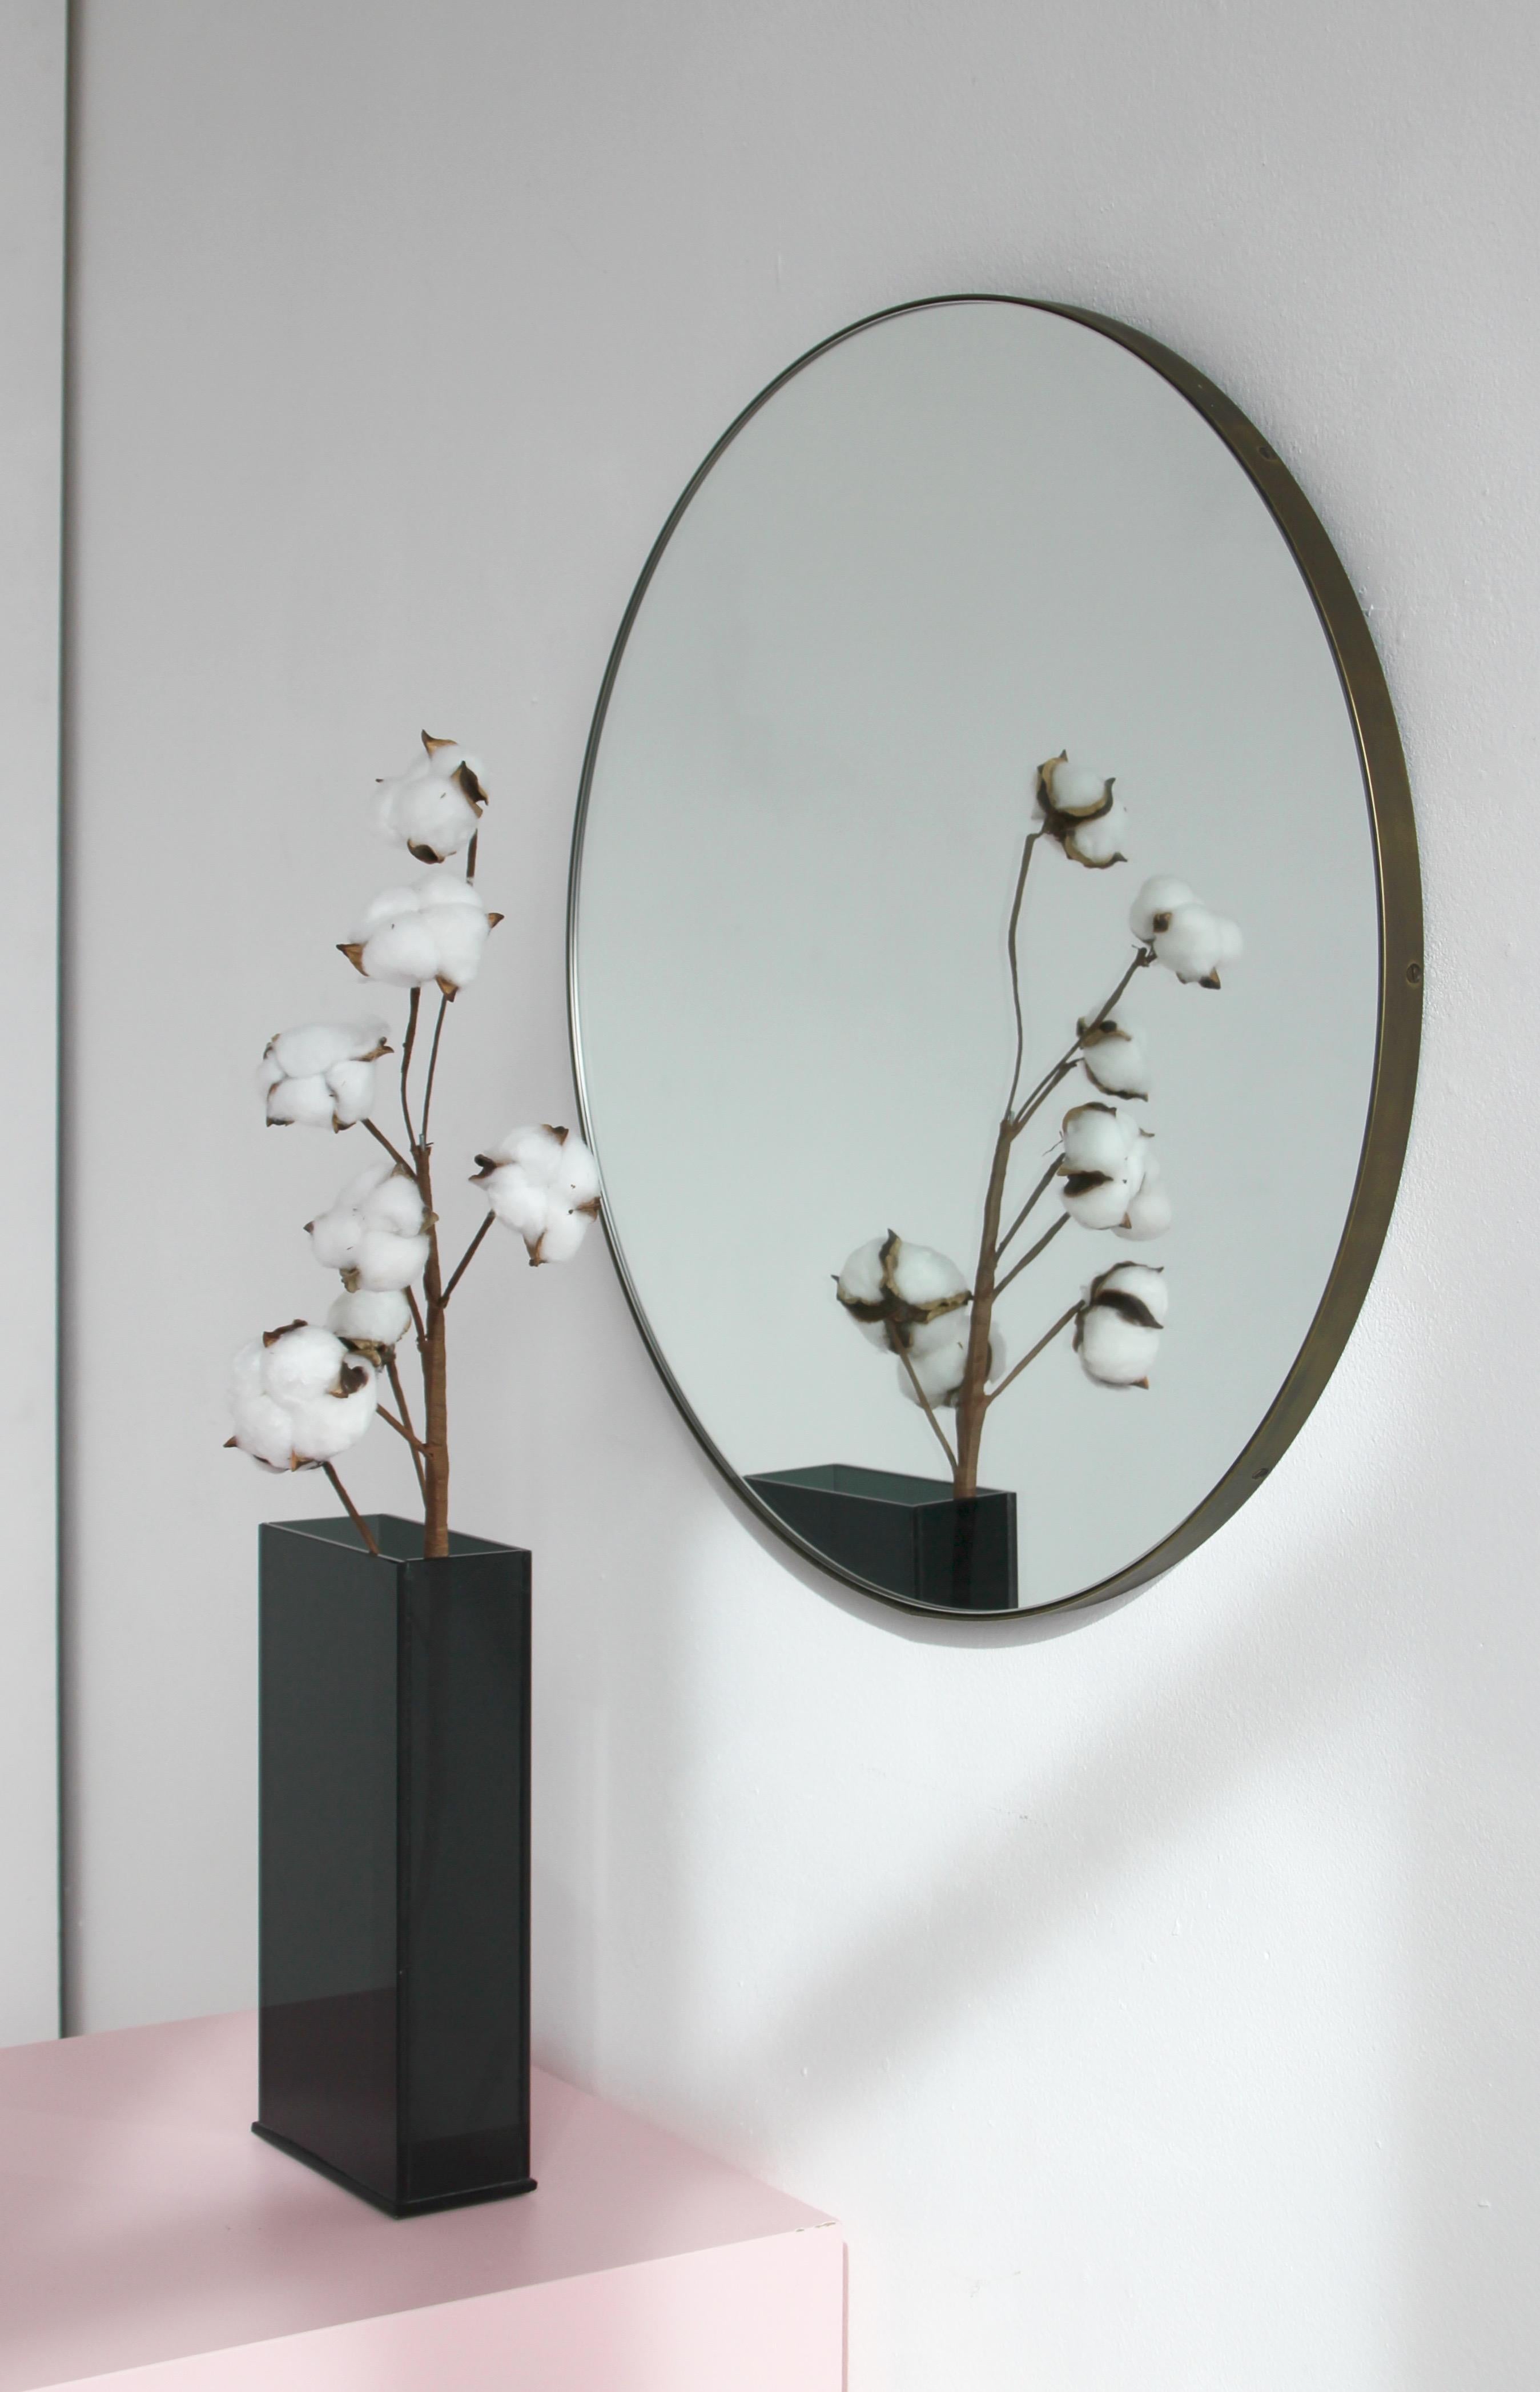 Minimalist Orbis™ round mirror with a solid brass frame with a bronze patina finish. The detailing and finish, including visible screws, emphasise the crafty and quality feel of the mirror, a true signature of our brand. Designed and made in London,